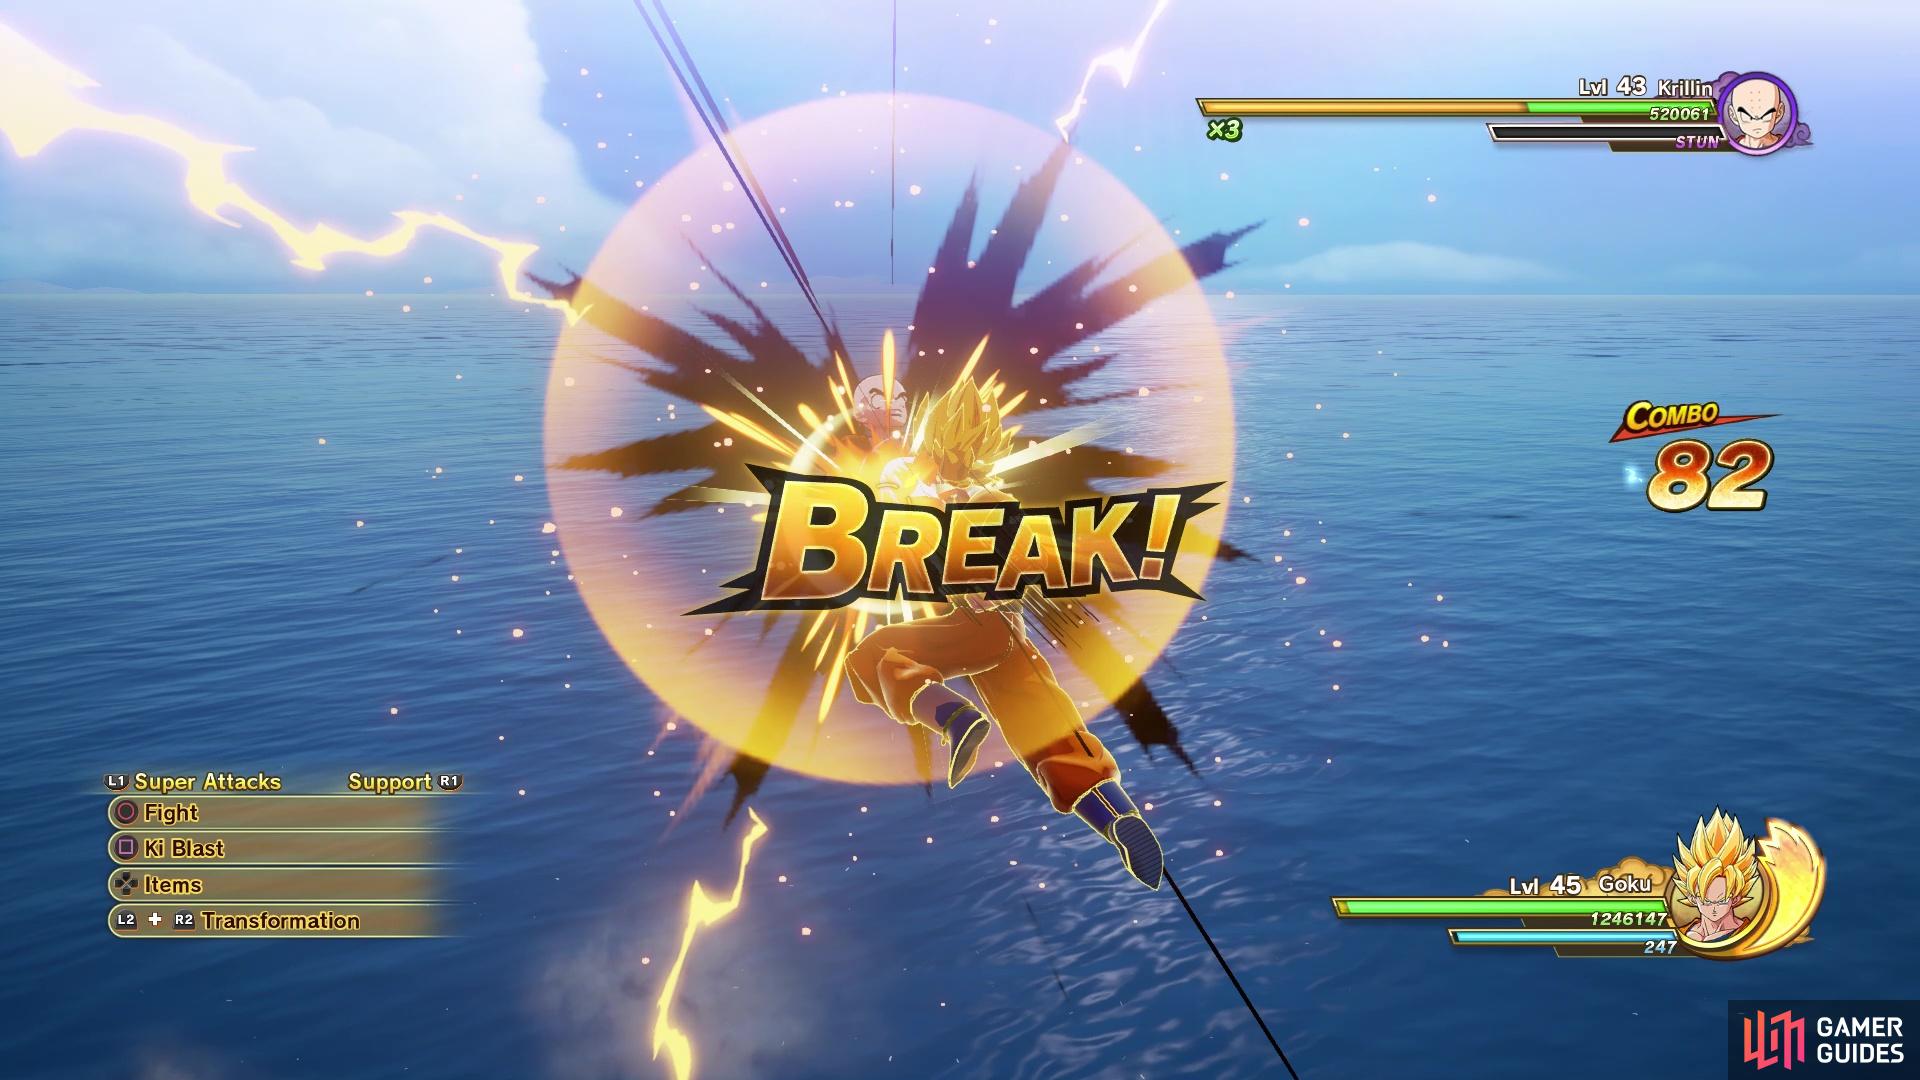 Krillin isn’t too aggressive, so you could probably break his stun gauge